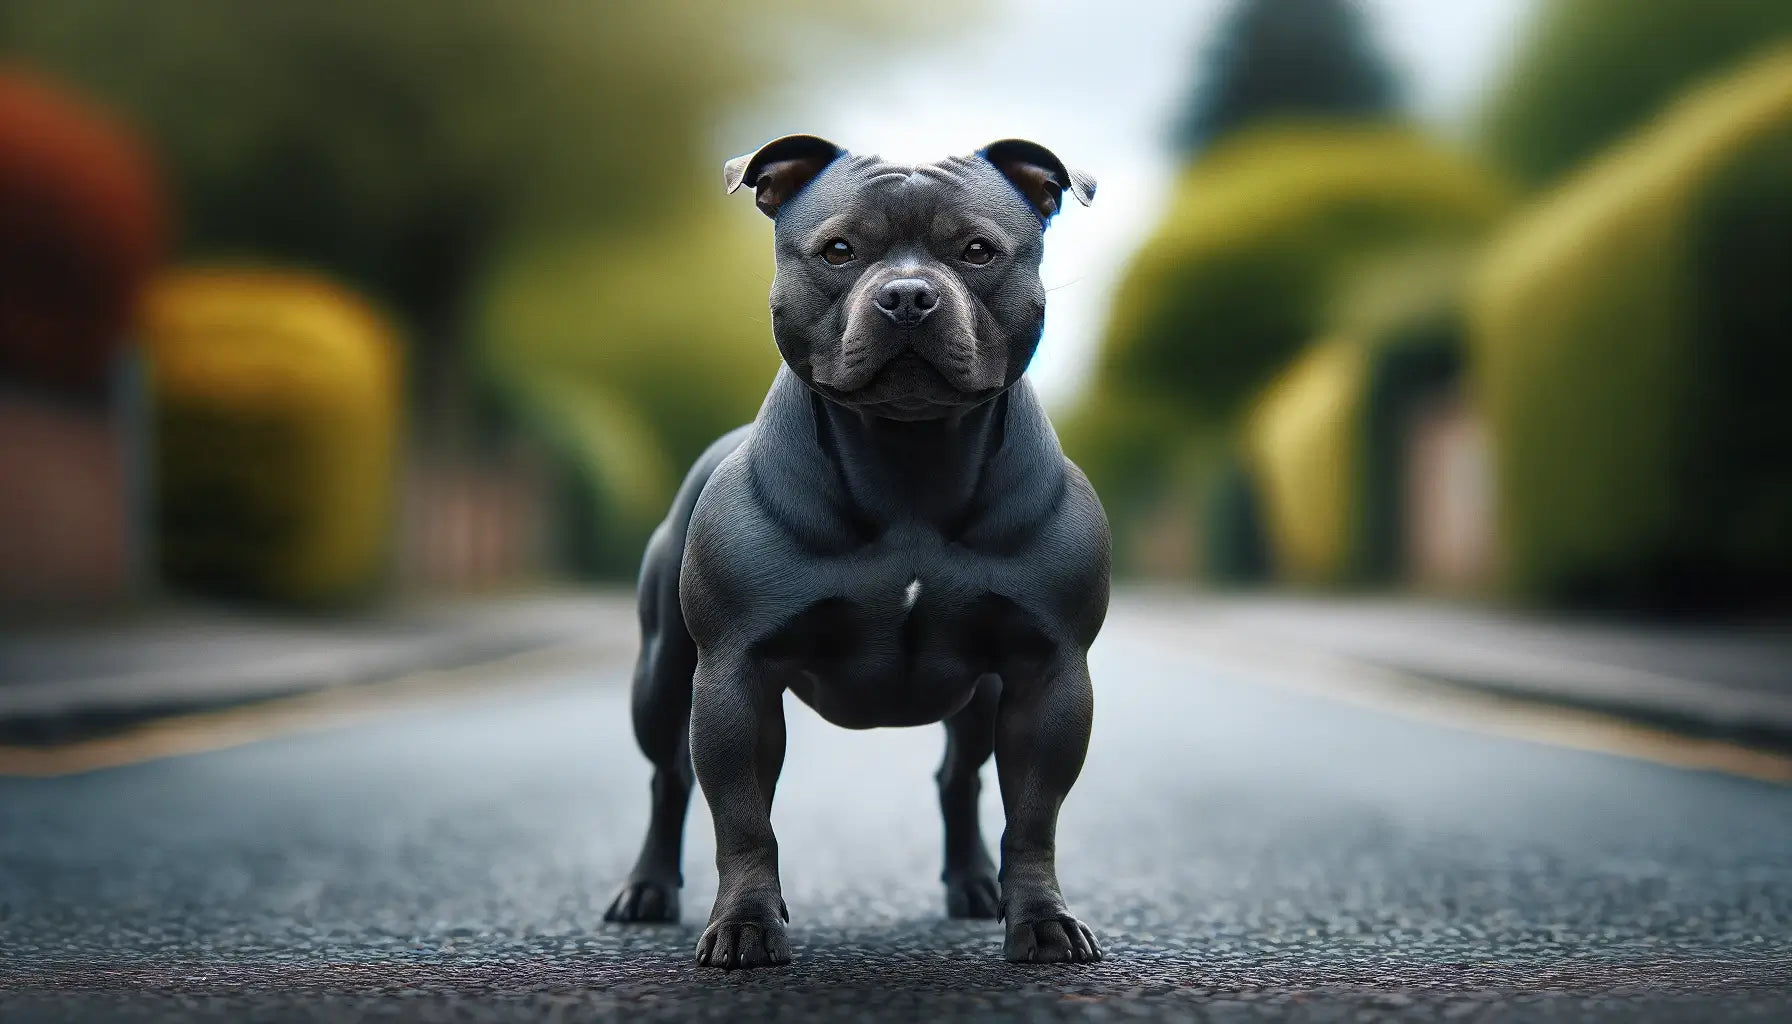 Blue Staffy standing confidently on a paved road showcasing its muscular build.